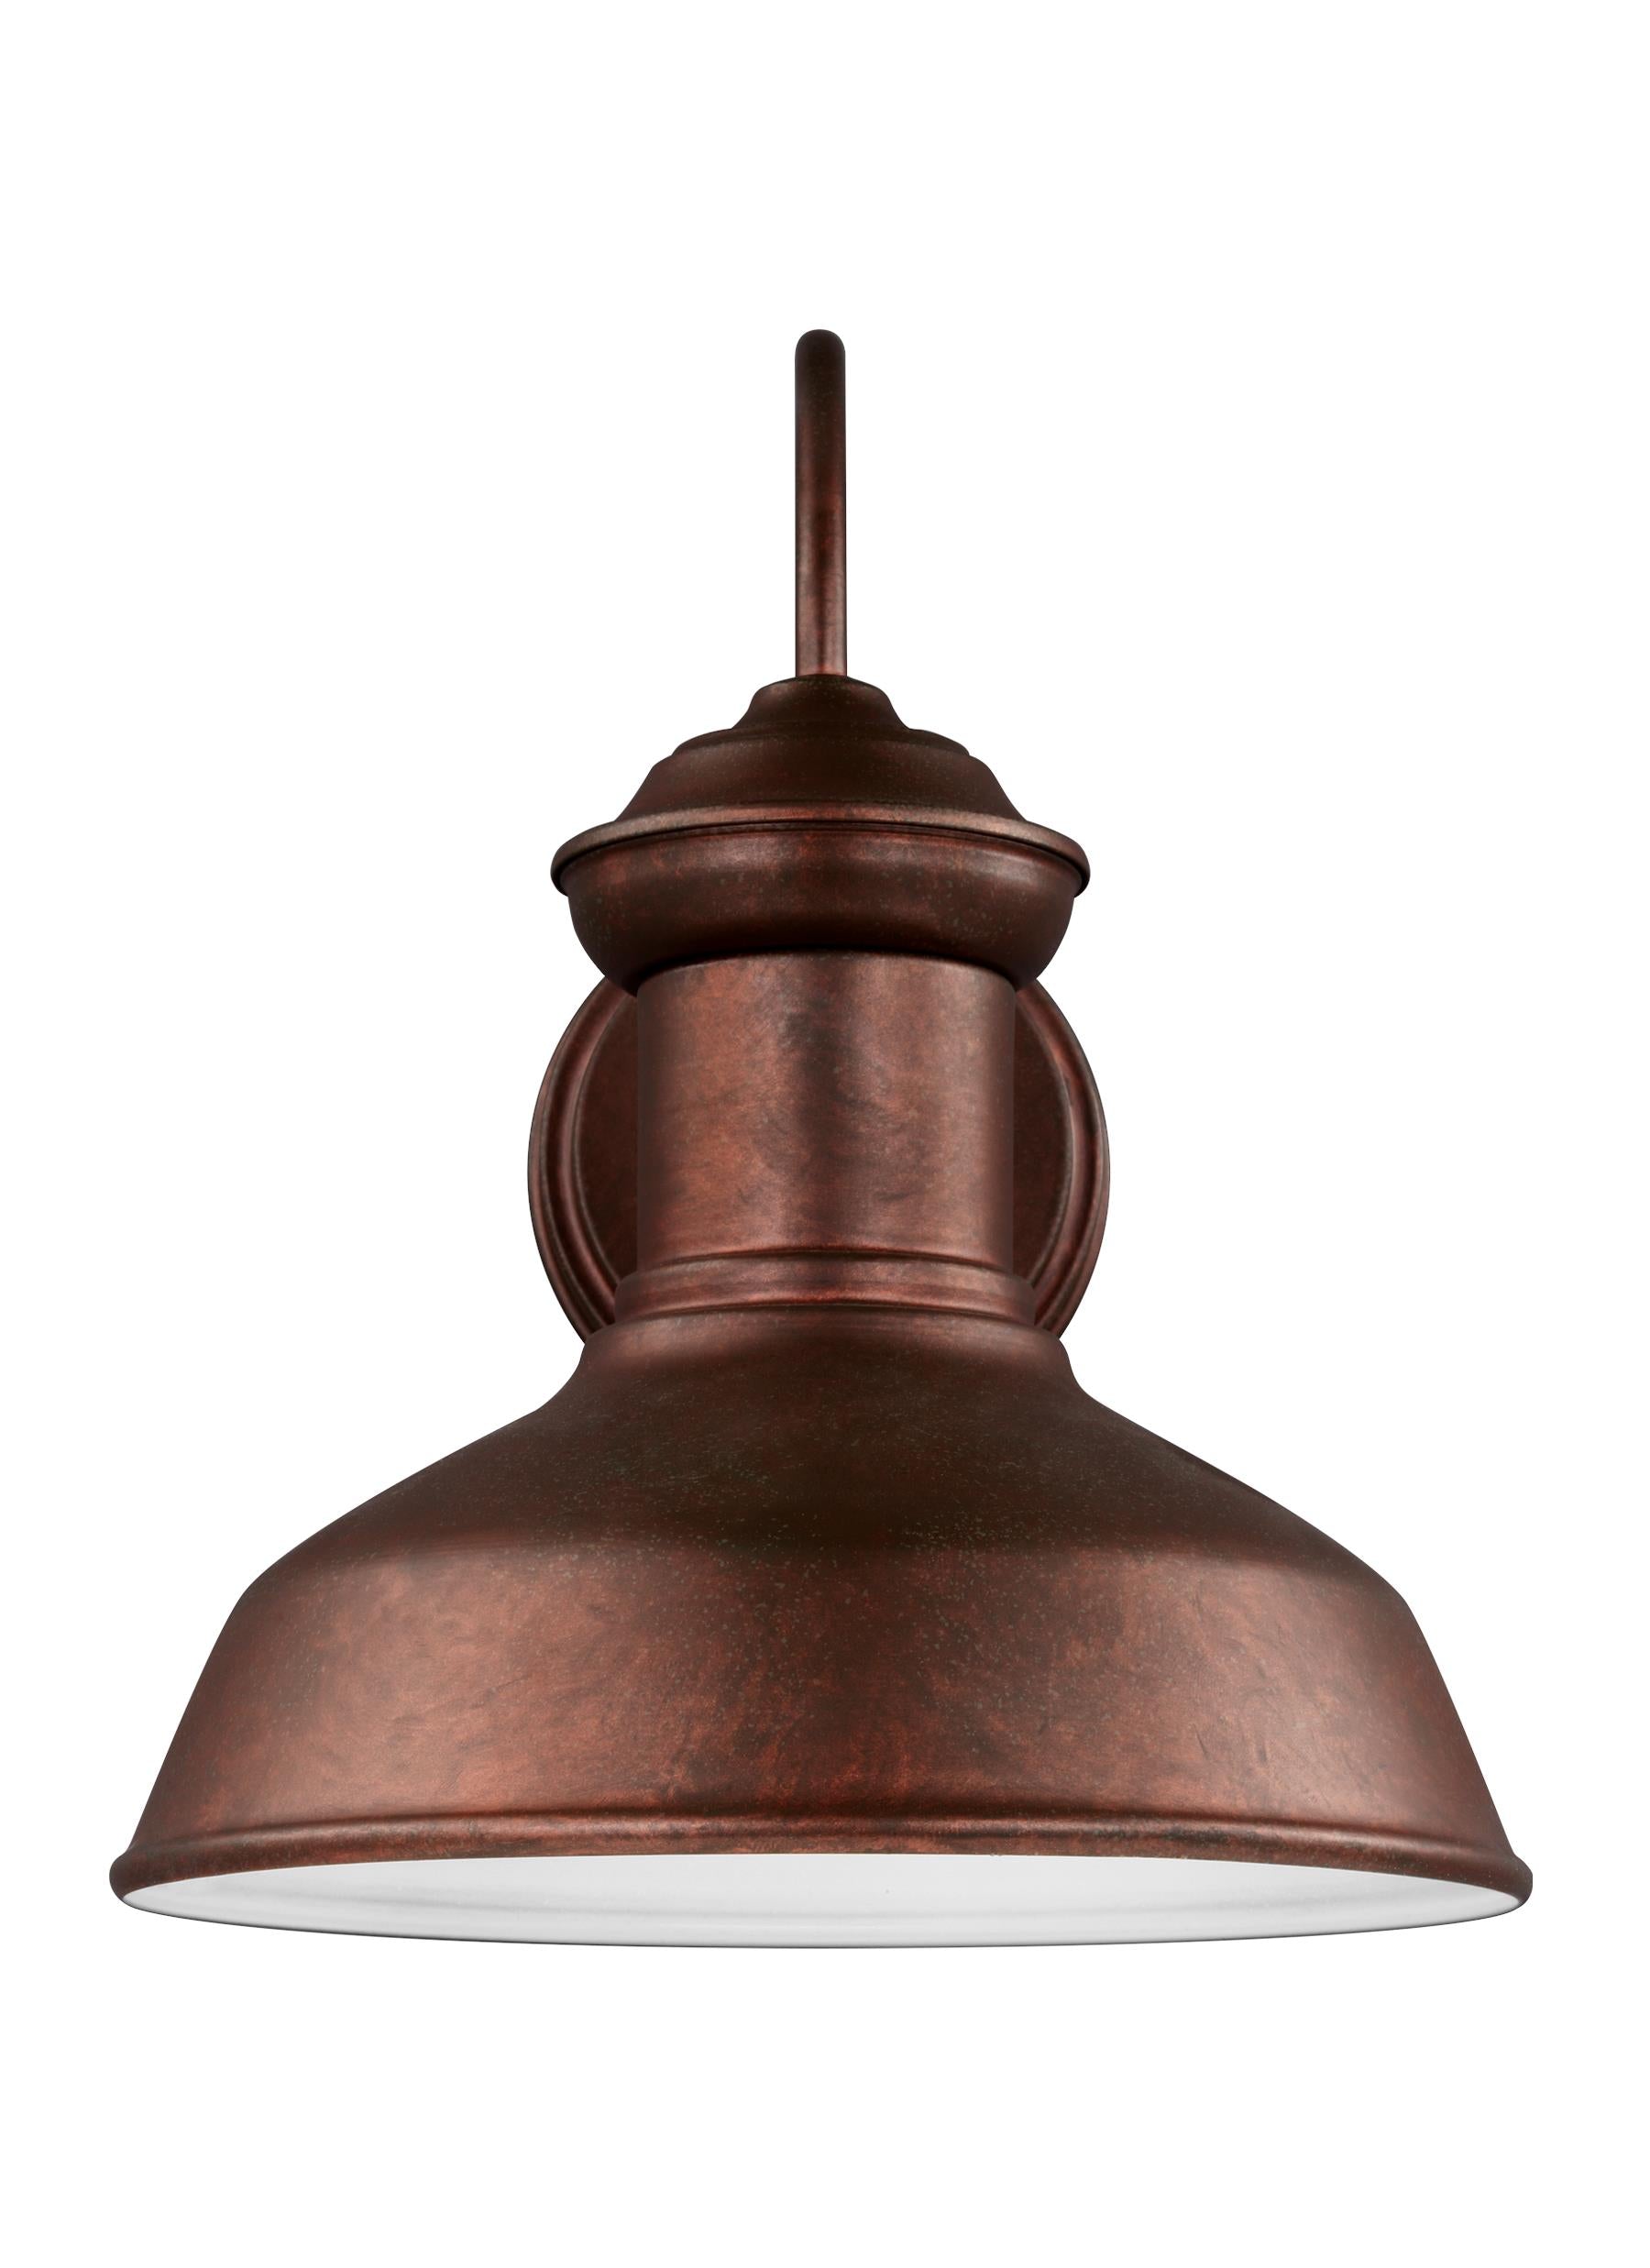 Fredricksburg traditional 1-light outdoor exterior Dark Sky compliant small wall lantern sconce in weathered copper finish